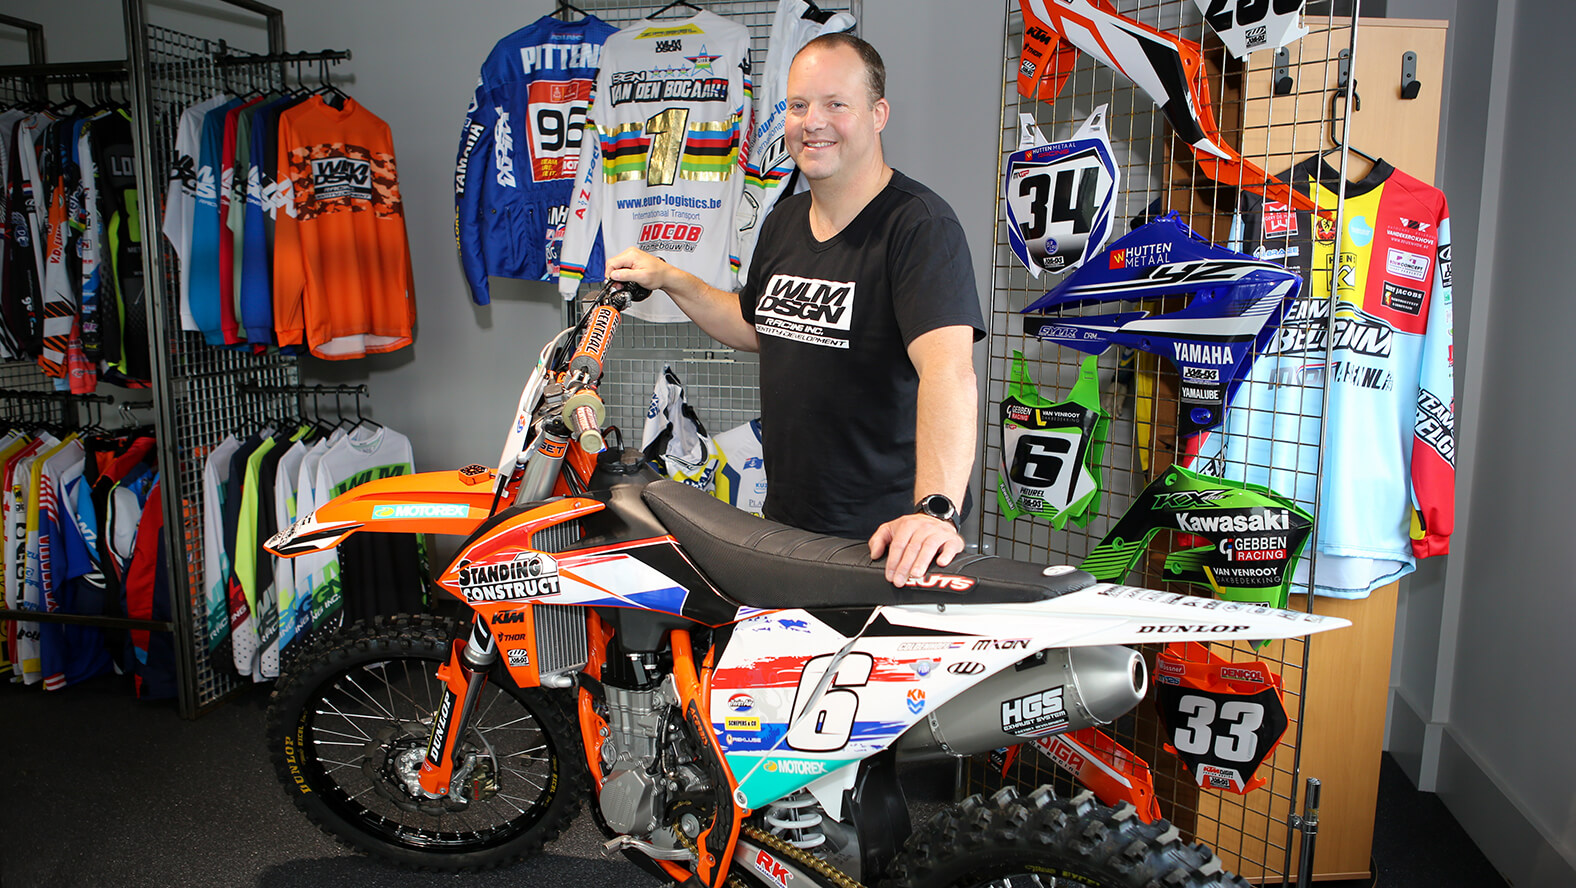 Wisja Lamers, founder of motocross graphics expert WLM Design, posed in their showroom.